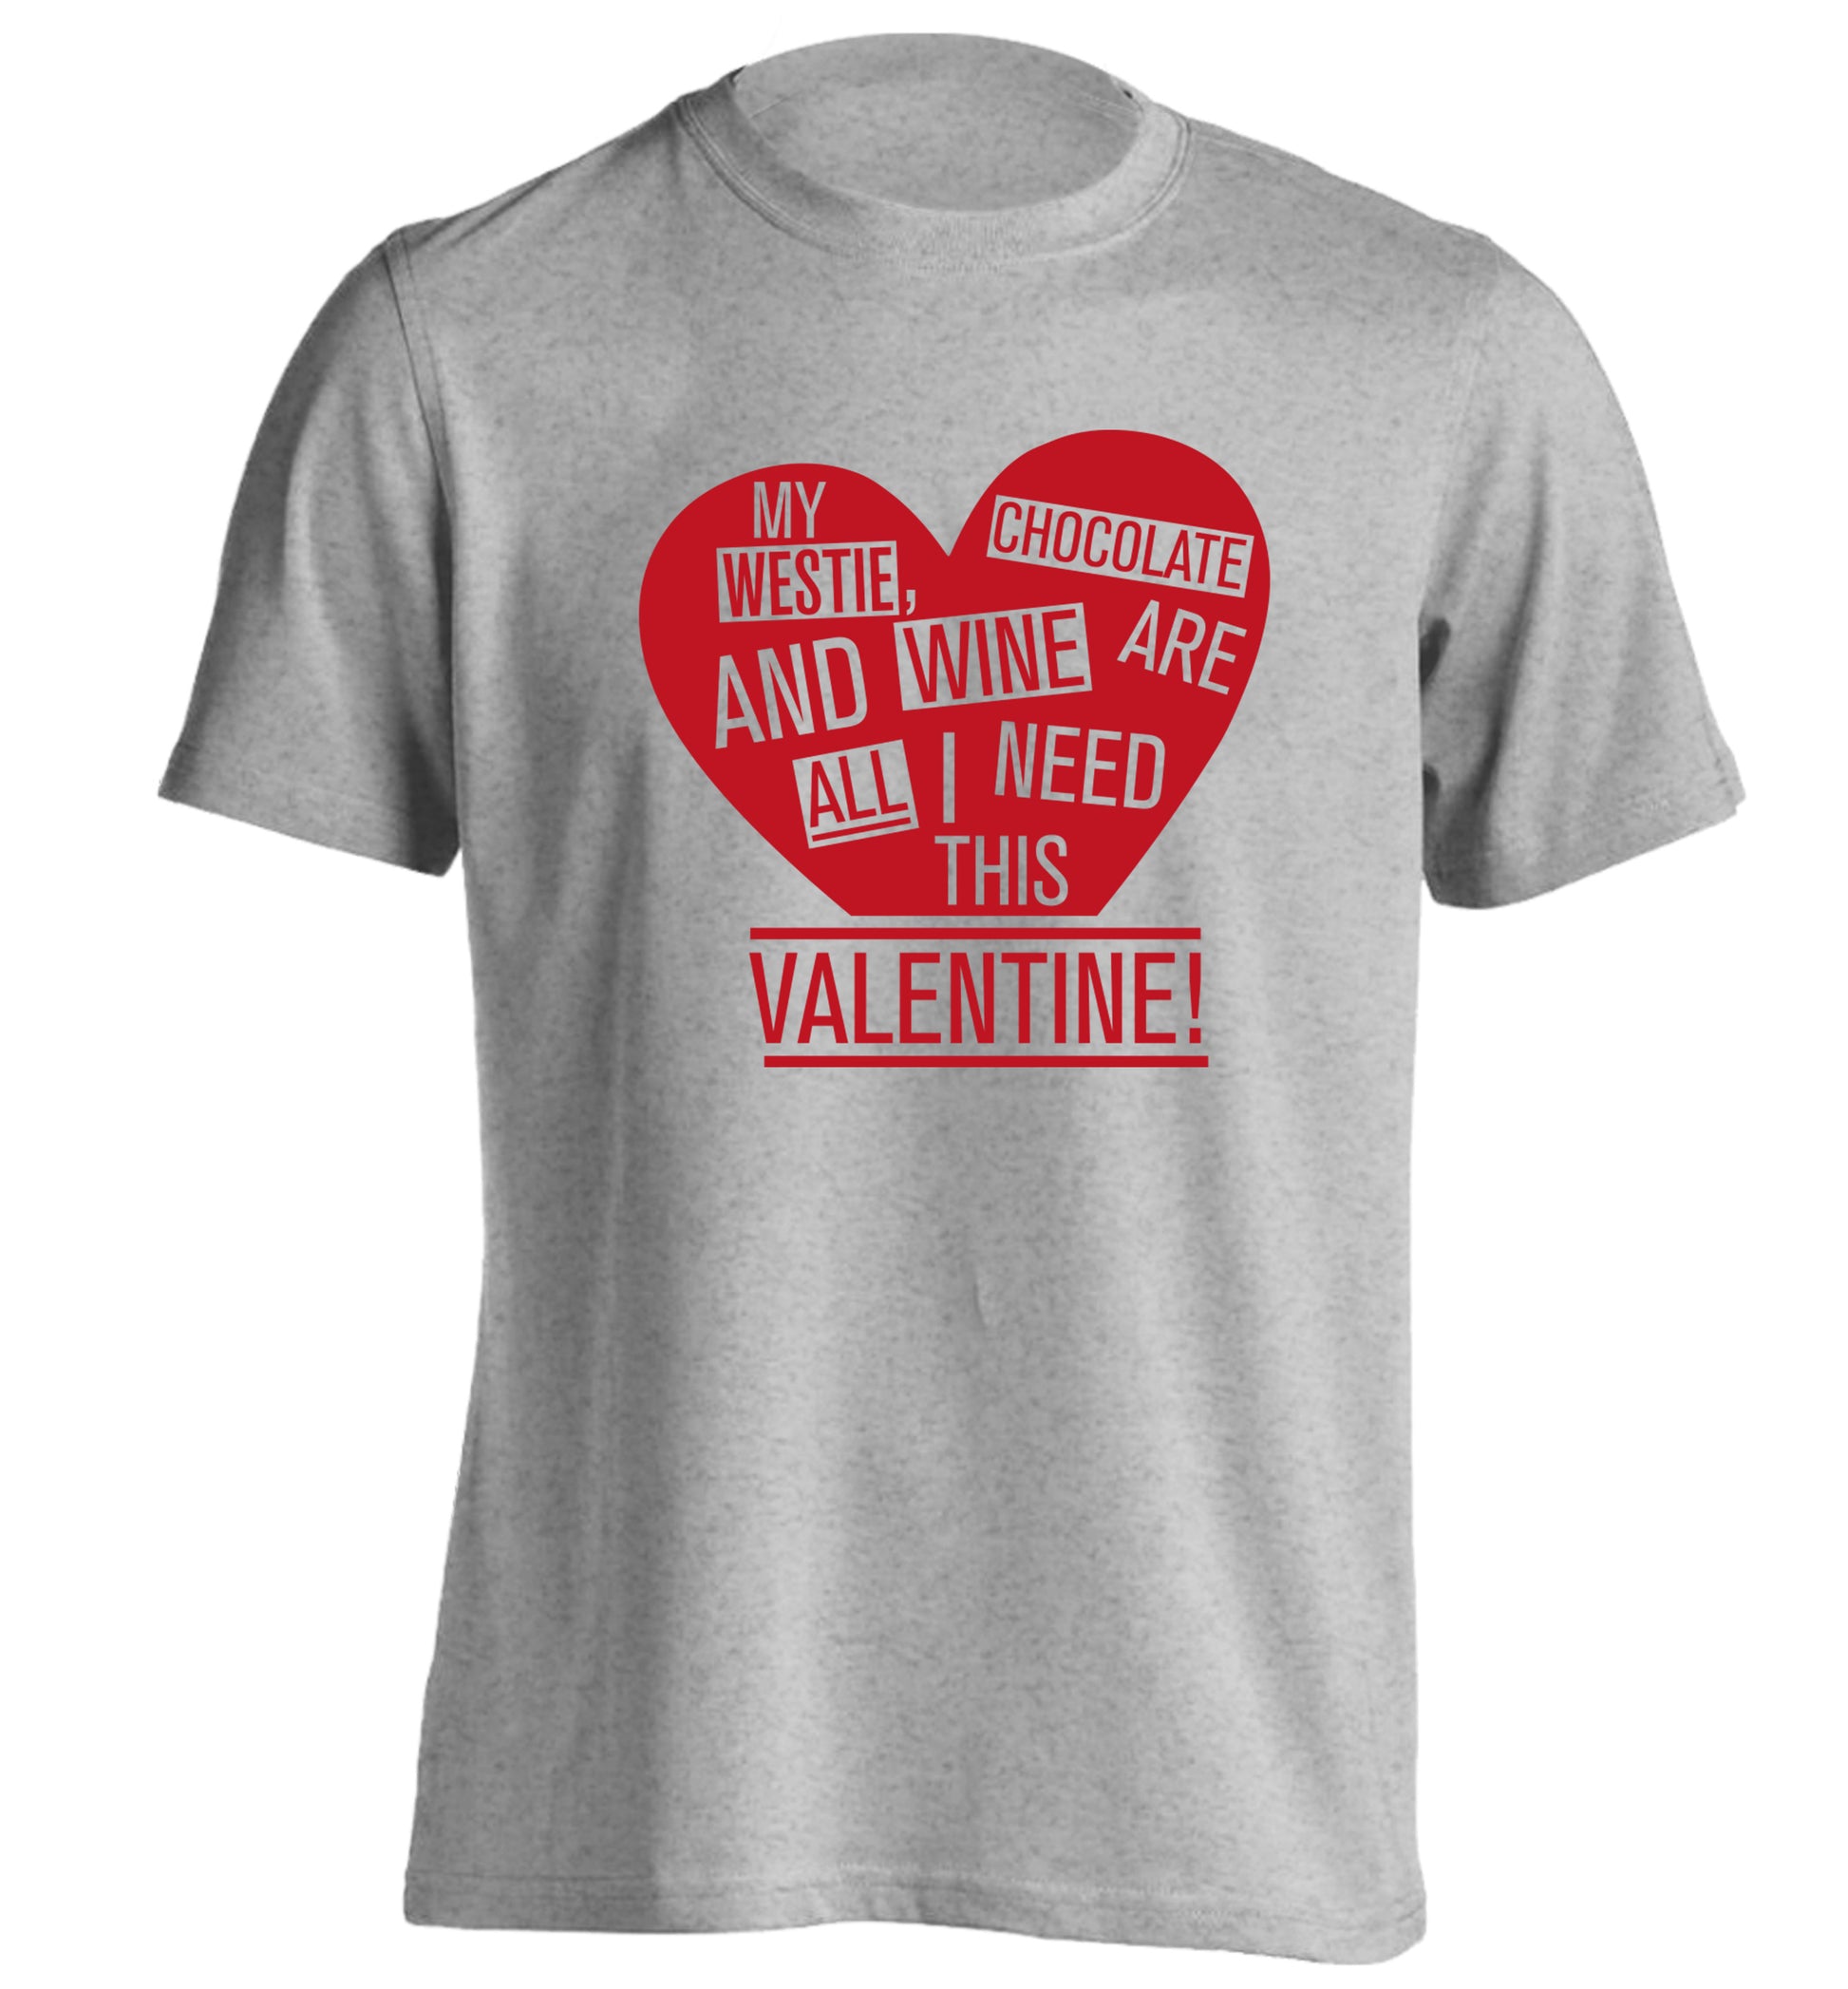 My westie, chocolate and wine are all I need this valentine! adults unisex grey Tshirt 2XL